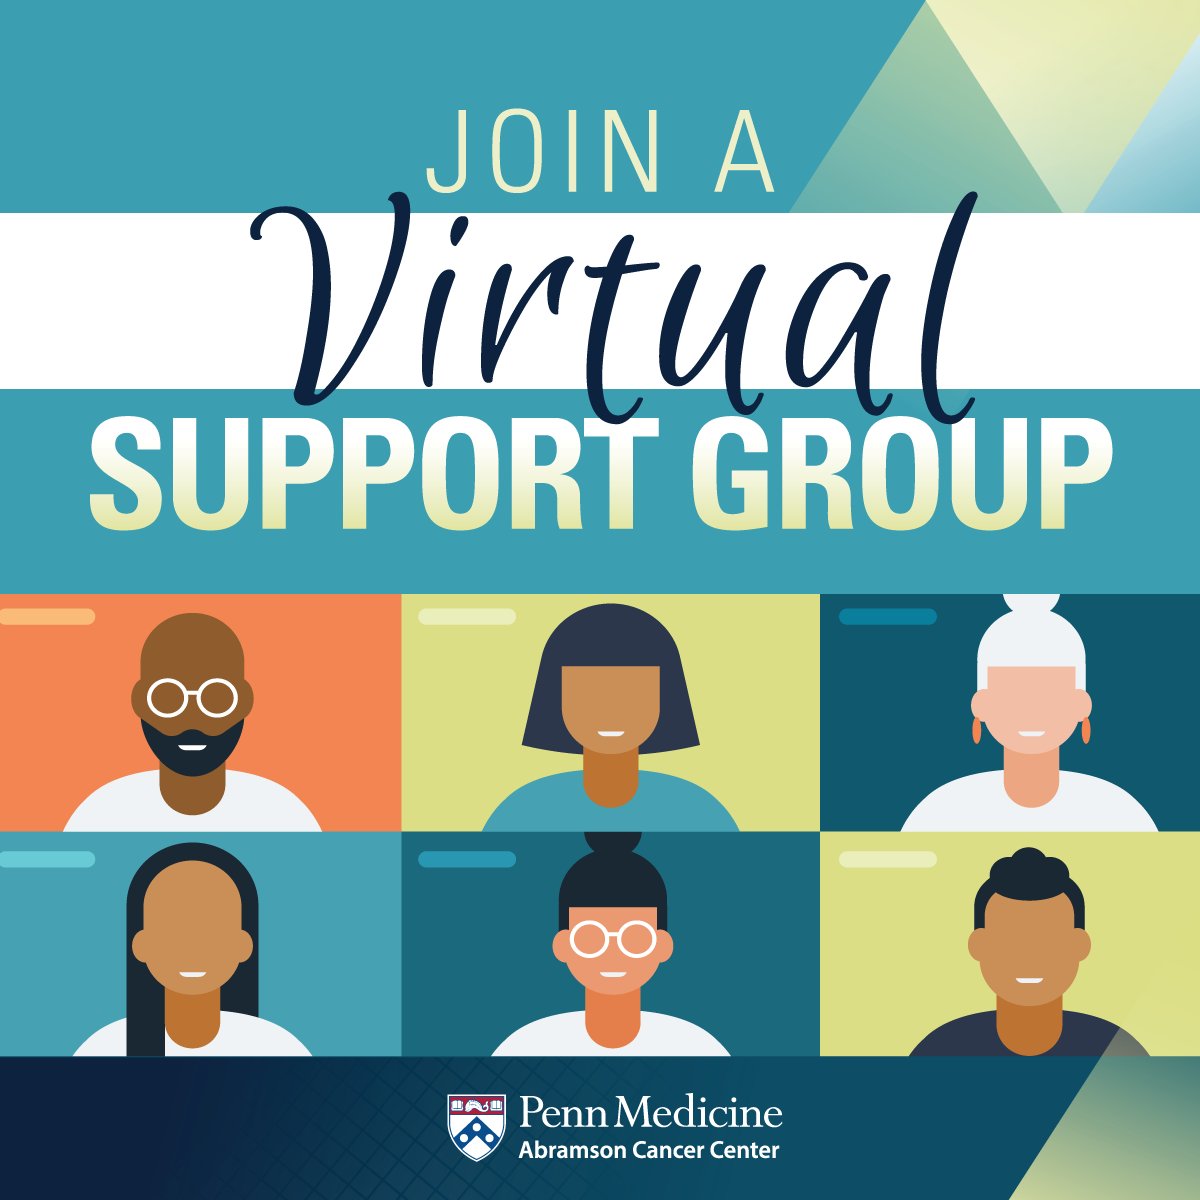 Getting the support you need is an important part of cancer treatment. We have a wide array of support groups that are meeting virtually to get you the support and resources you need. Check out our offerings here: spr.ly/6010MdUnm.